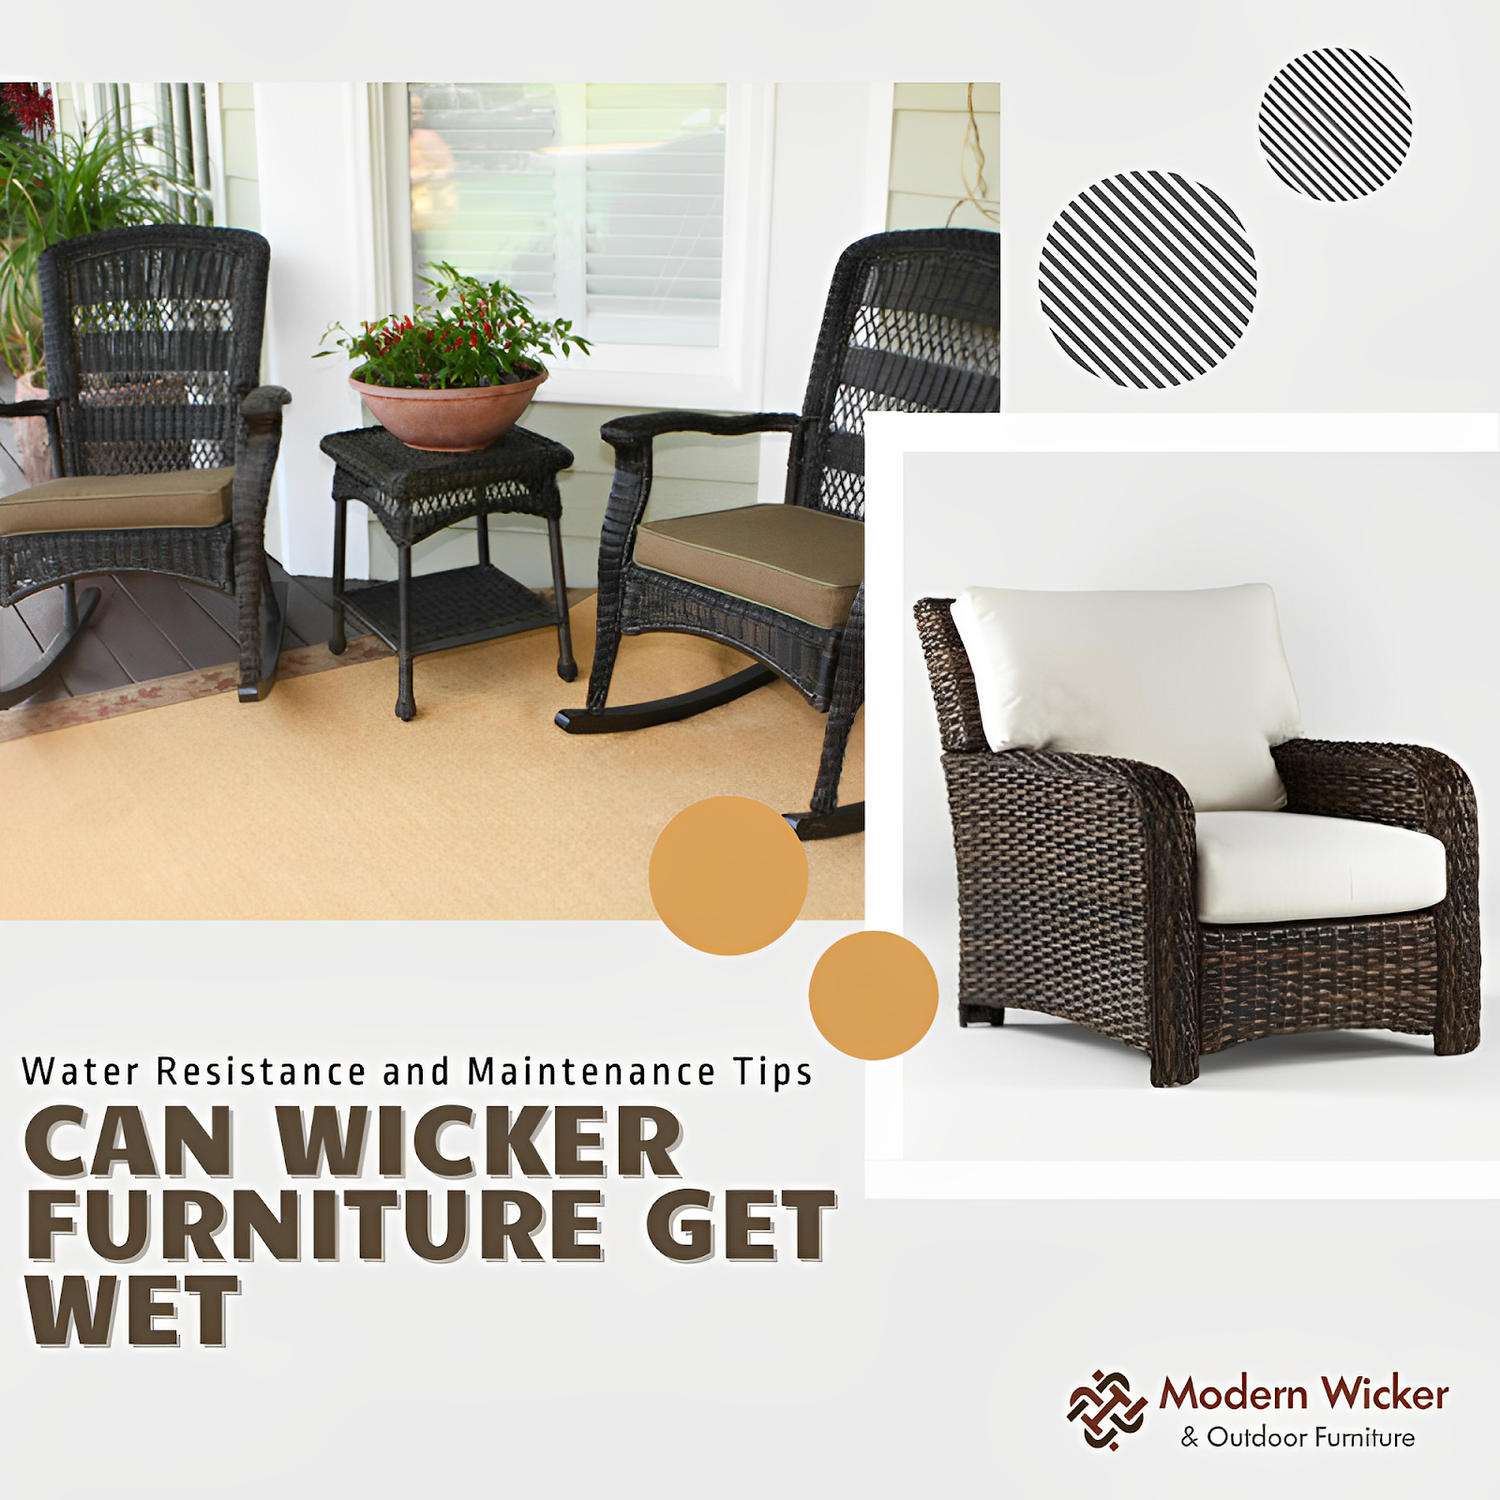 Can Wicker Furniture Get Wet? Water Resistance and Maintenance Tips